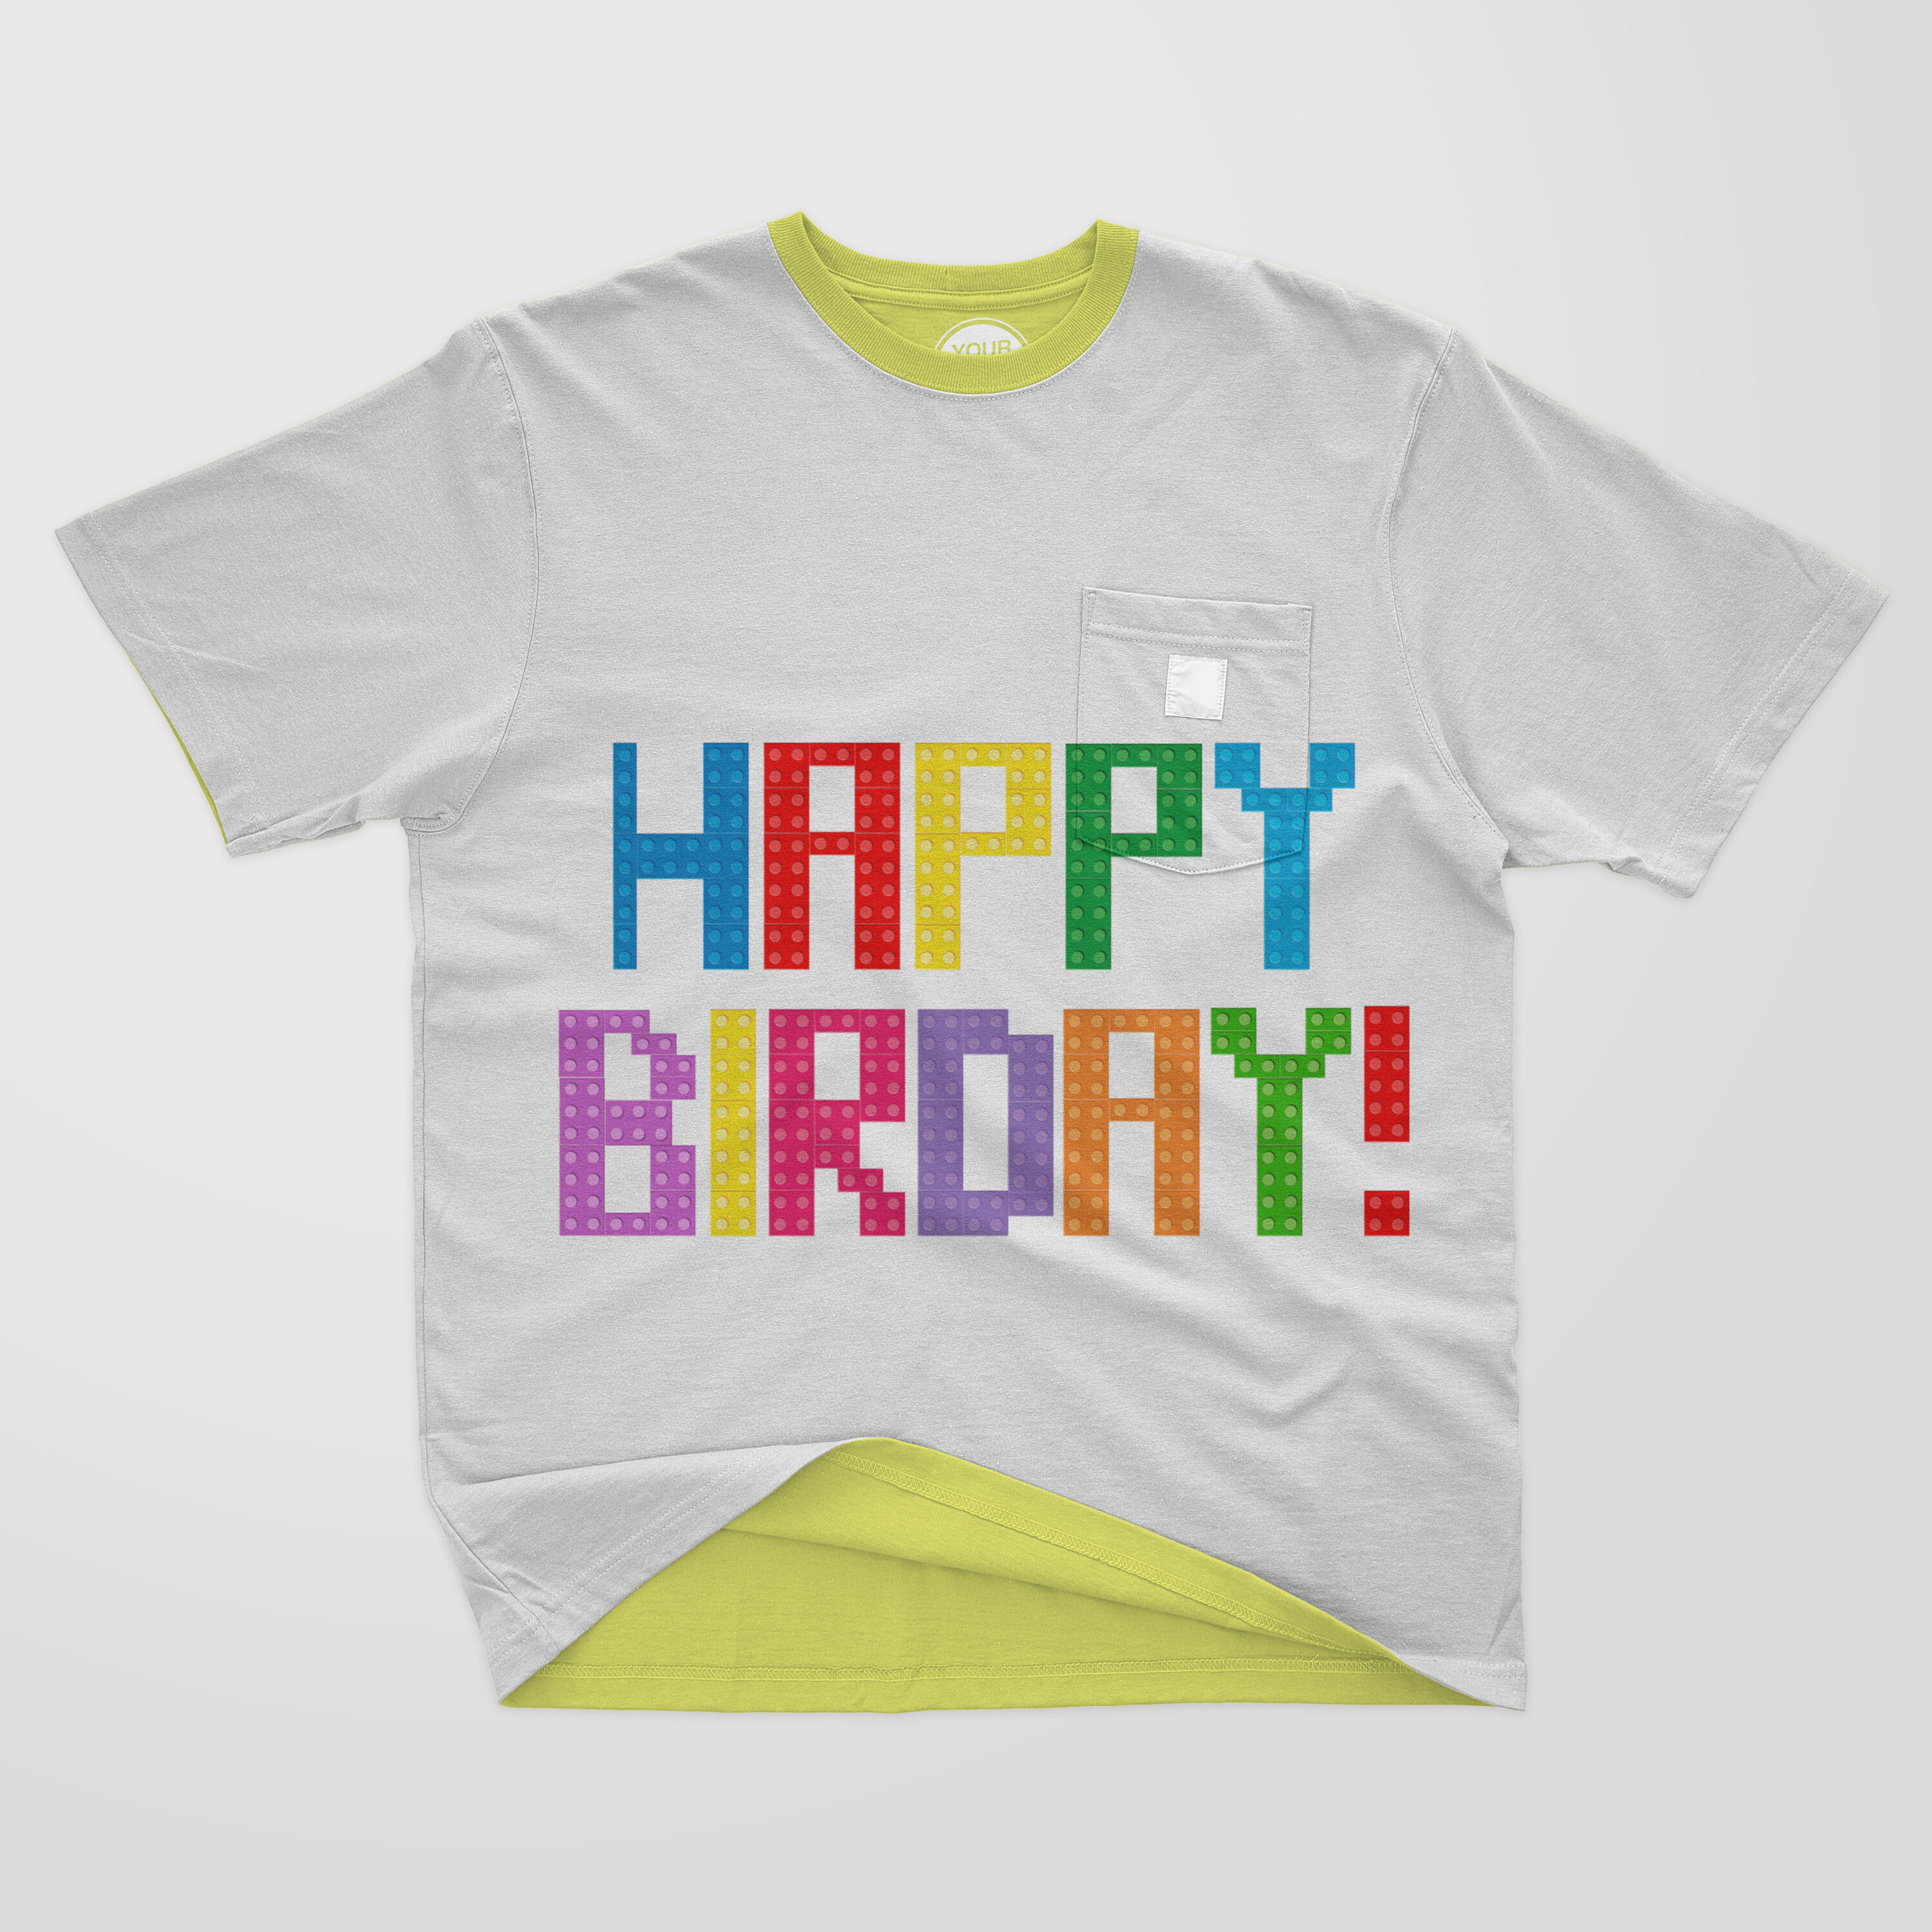 Happy Children's Day print on a t-shirt.